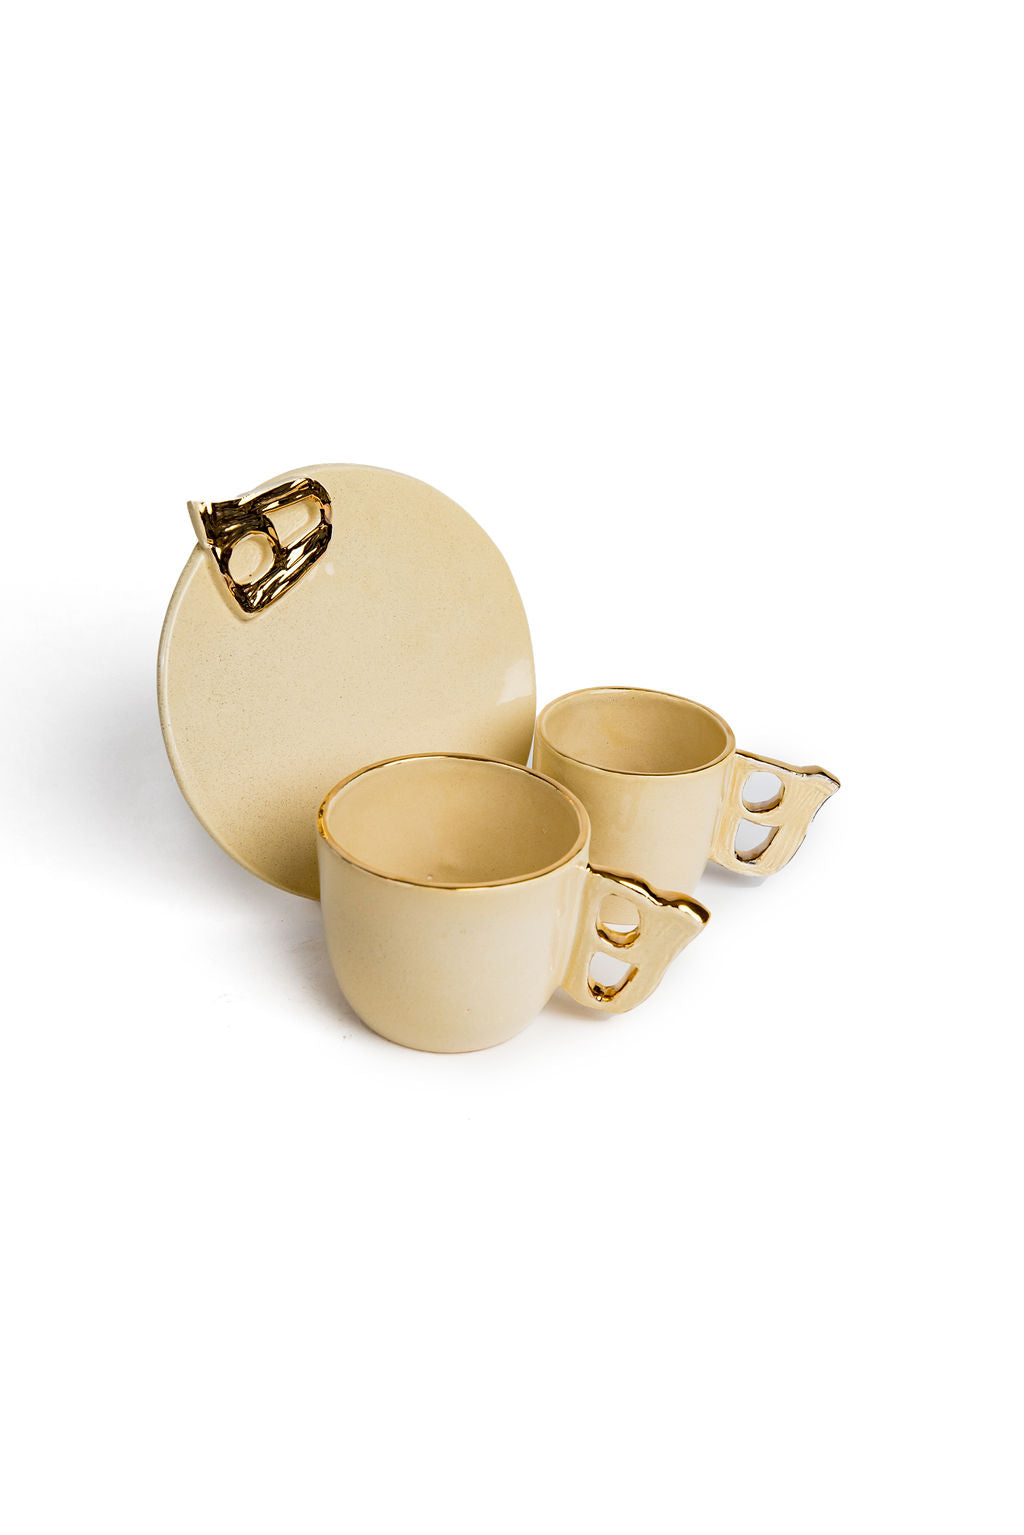 Beige And Gold H Plate And Mugs Set | 3 Piece Set